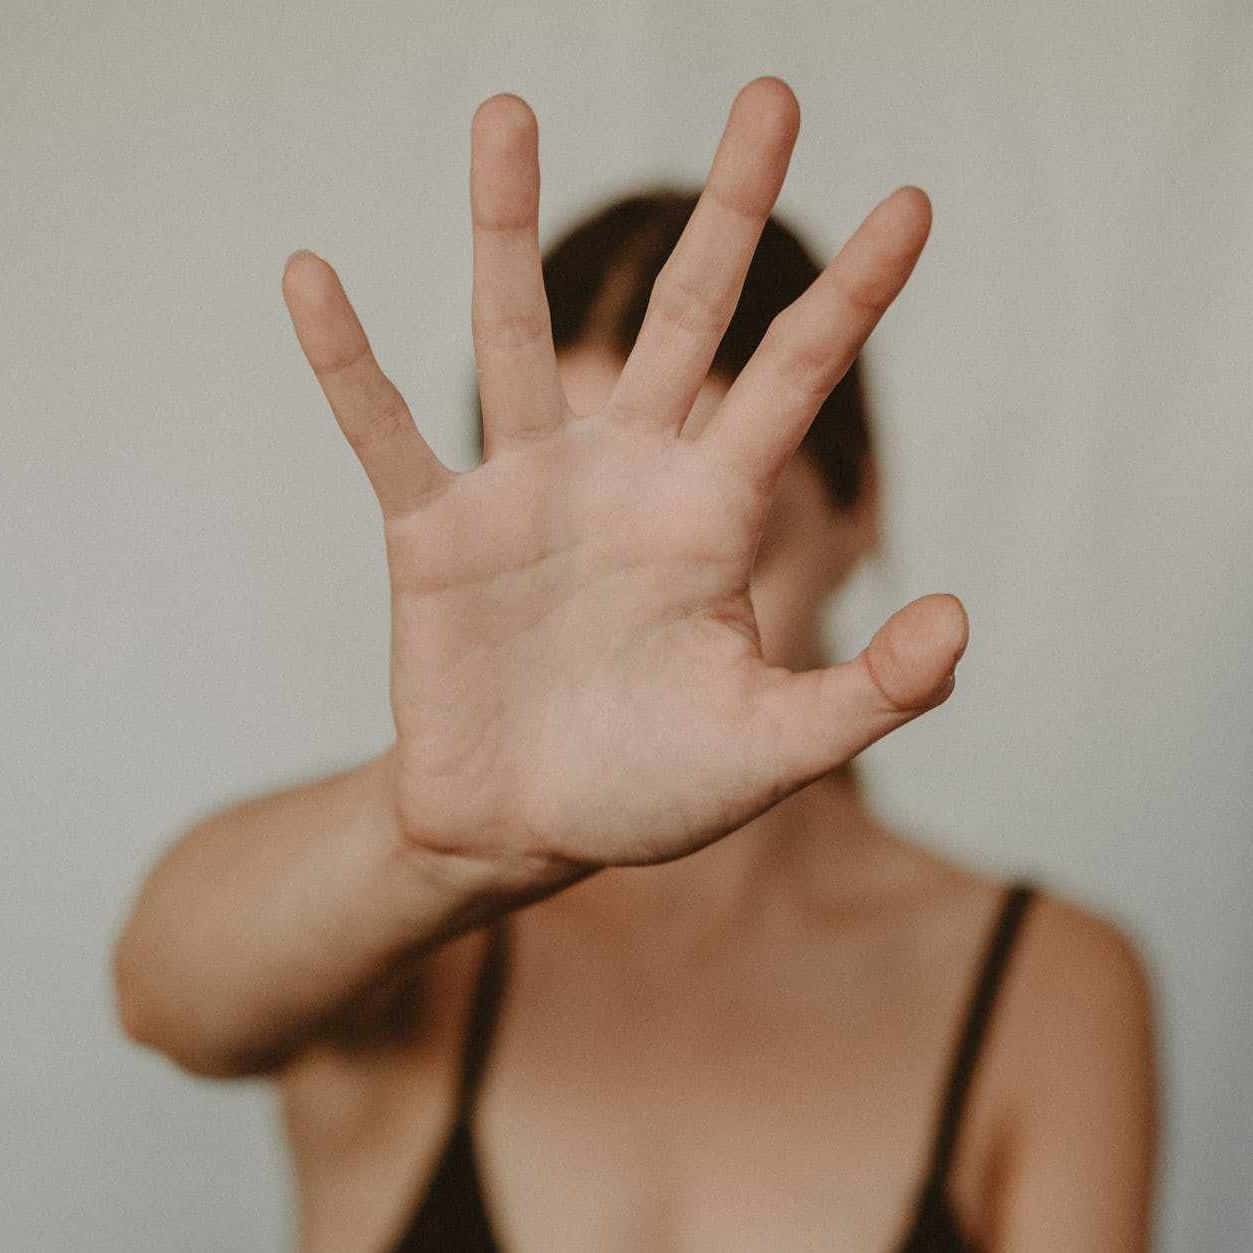 a woman from a previously abusive relationship holding one hand up defensively